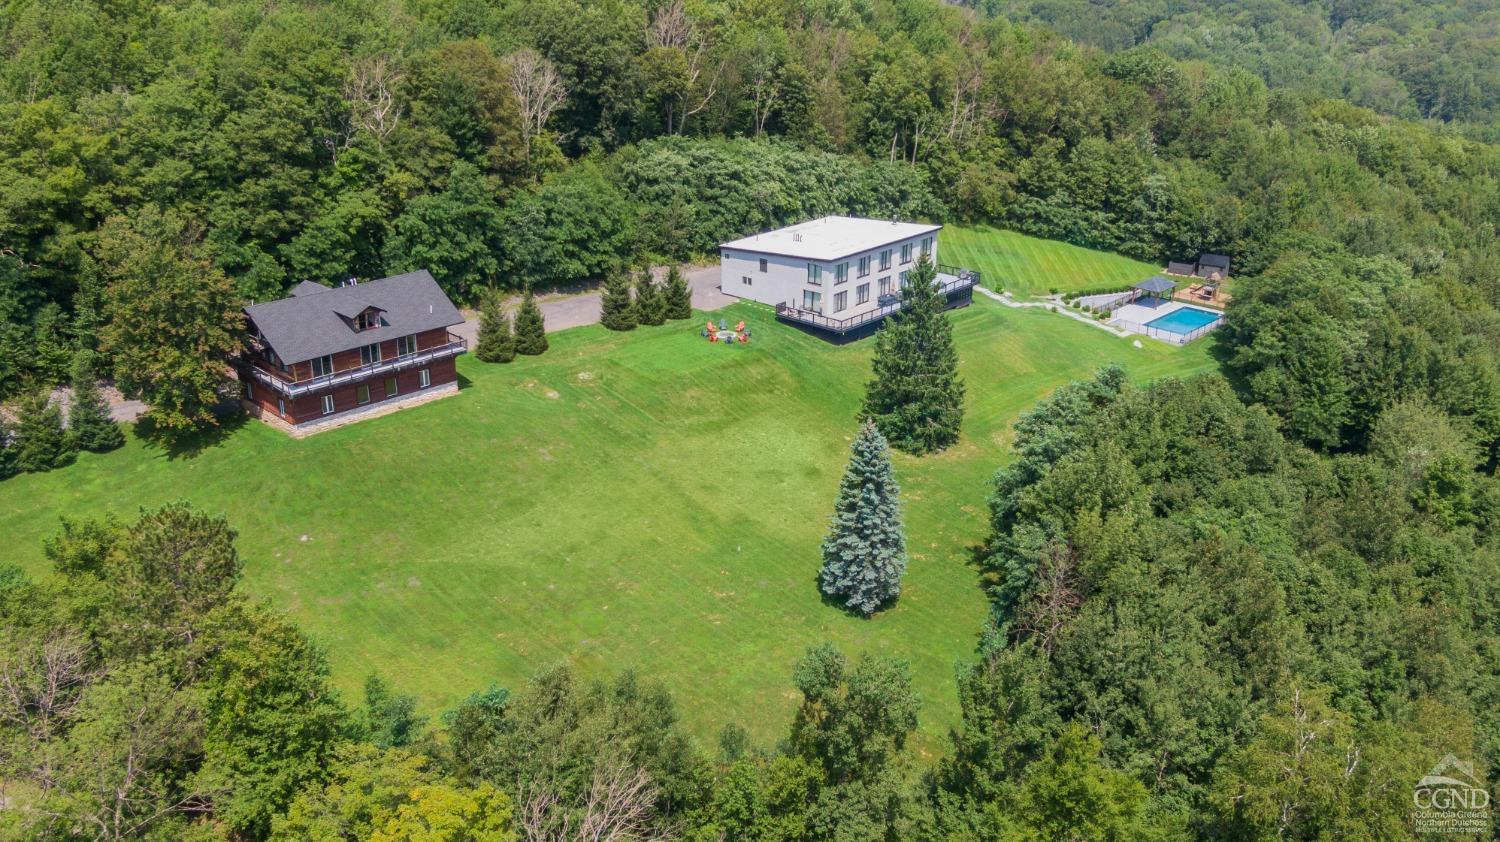 Property for Sale at 88 Minew Rd Rd, Lexington, New York - Bedrooms: 6 
Bathrooms: 7 
Rooms: 15  - $2,495,000